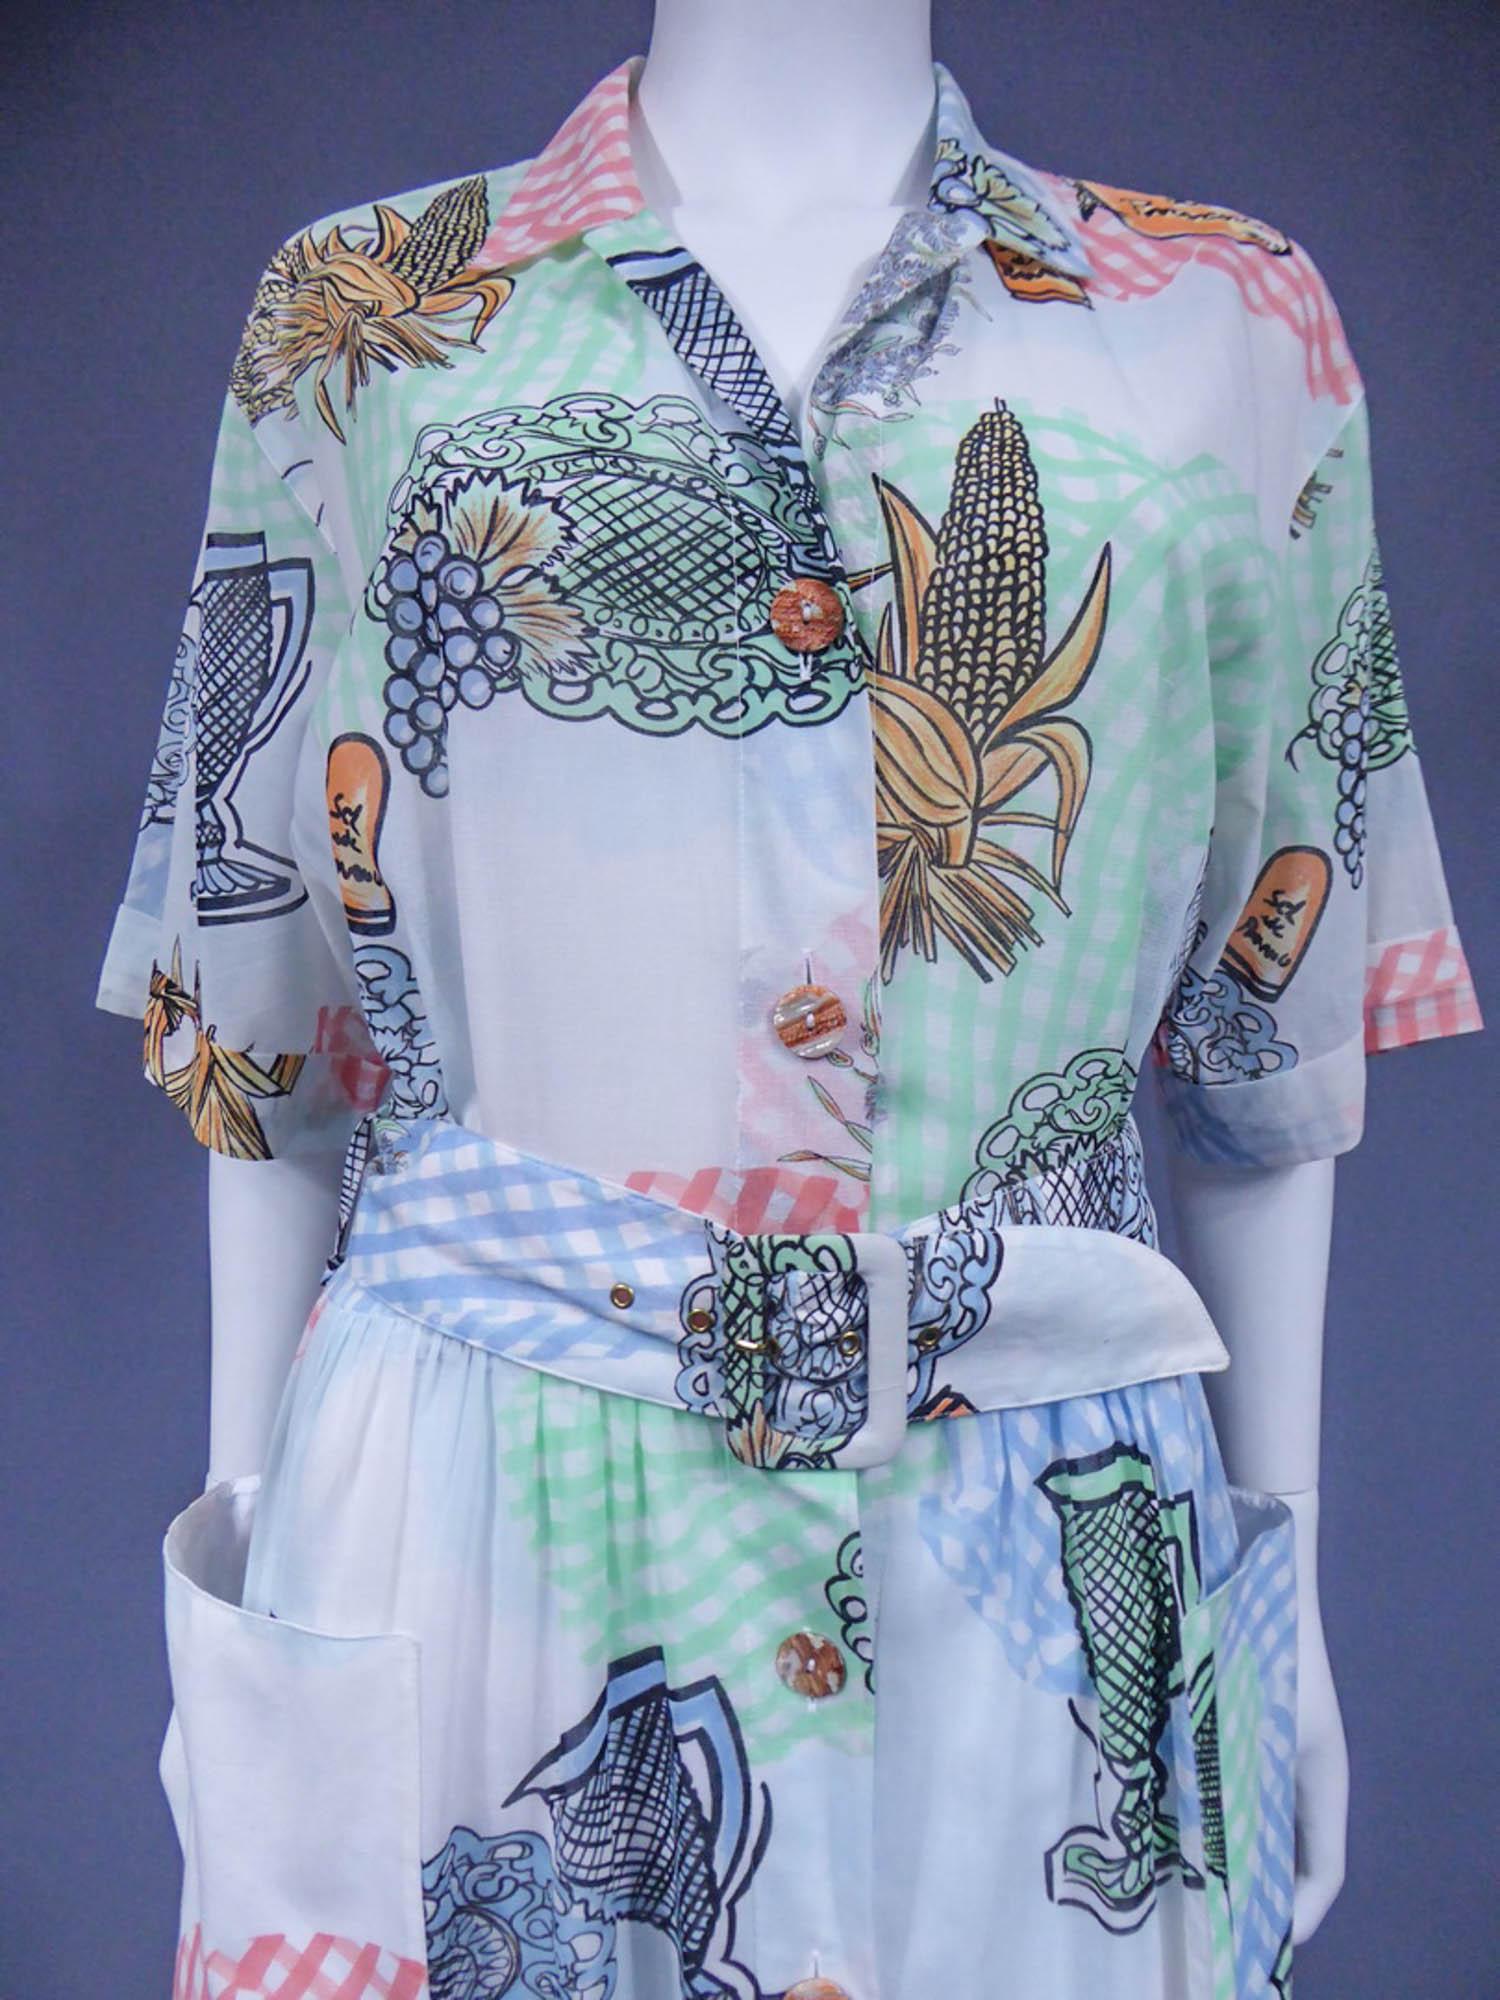 Circa 1970
France

Dress in printed polyamide in the provençal style by Louis Féraud and dating from the 1970s. Short-sleeved model, a matching belt buckle and a wide skirt lining. Opening on the front with matching resin buttons. Provencal